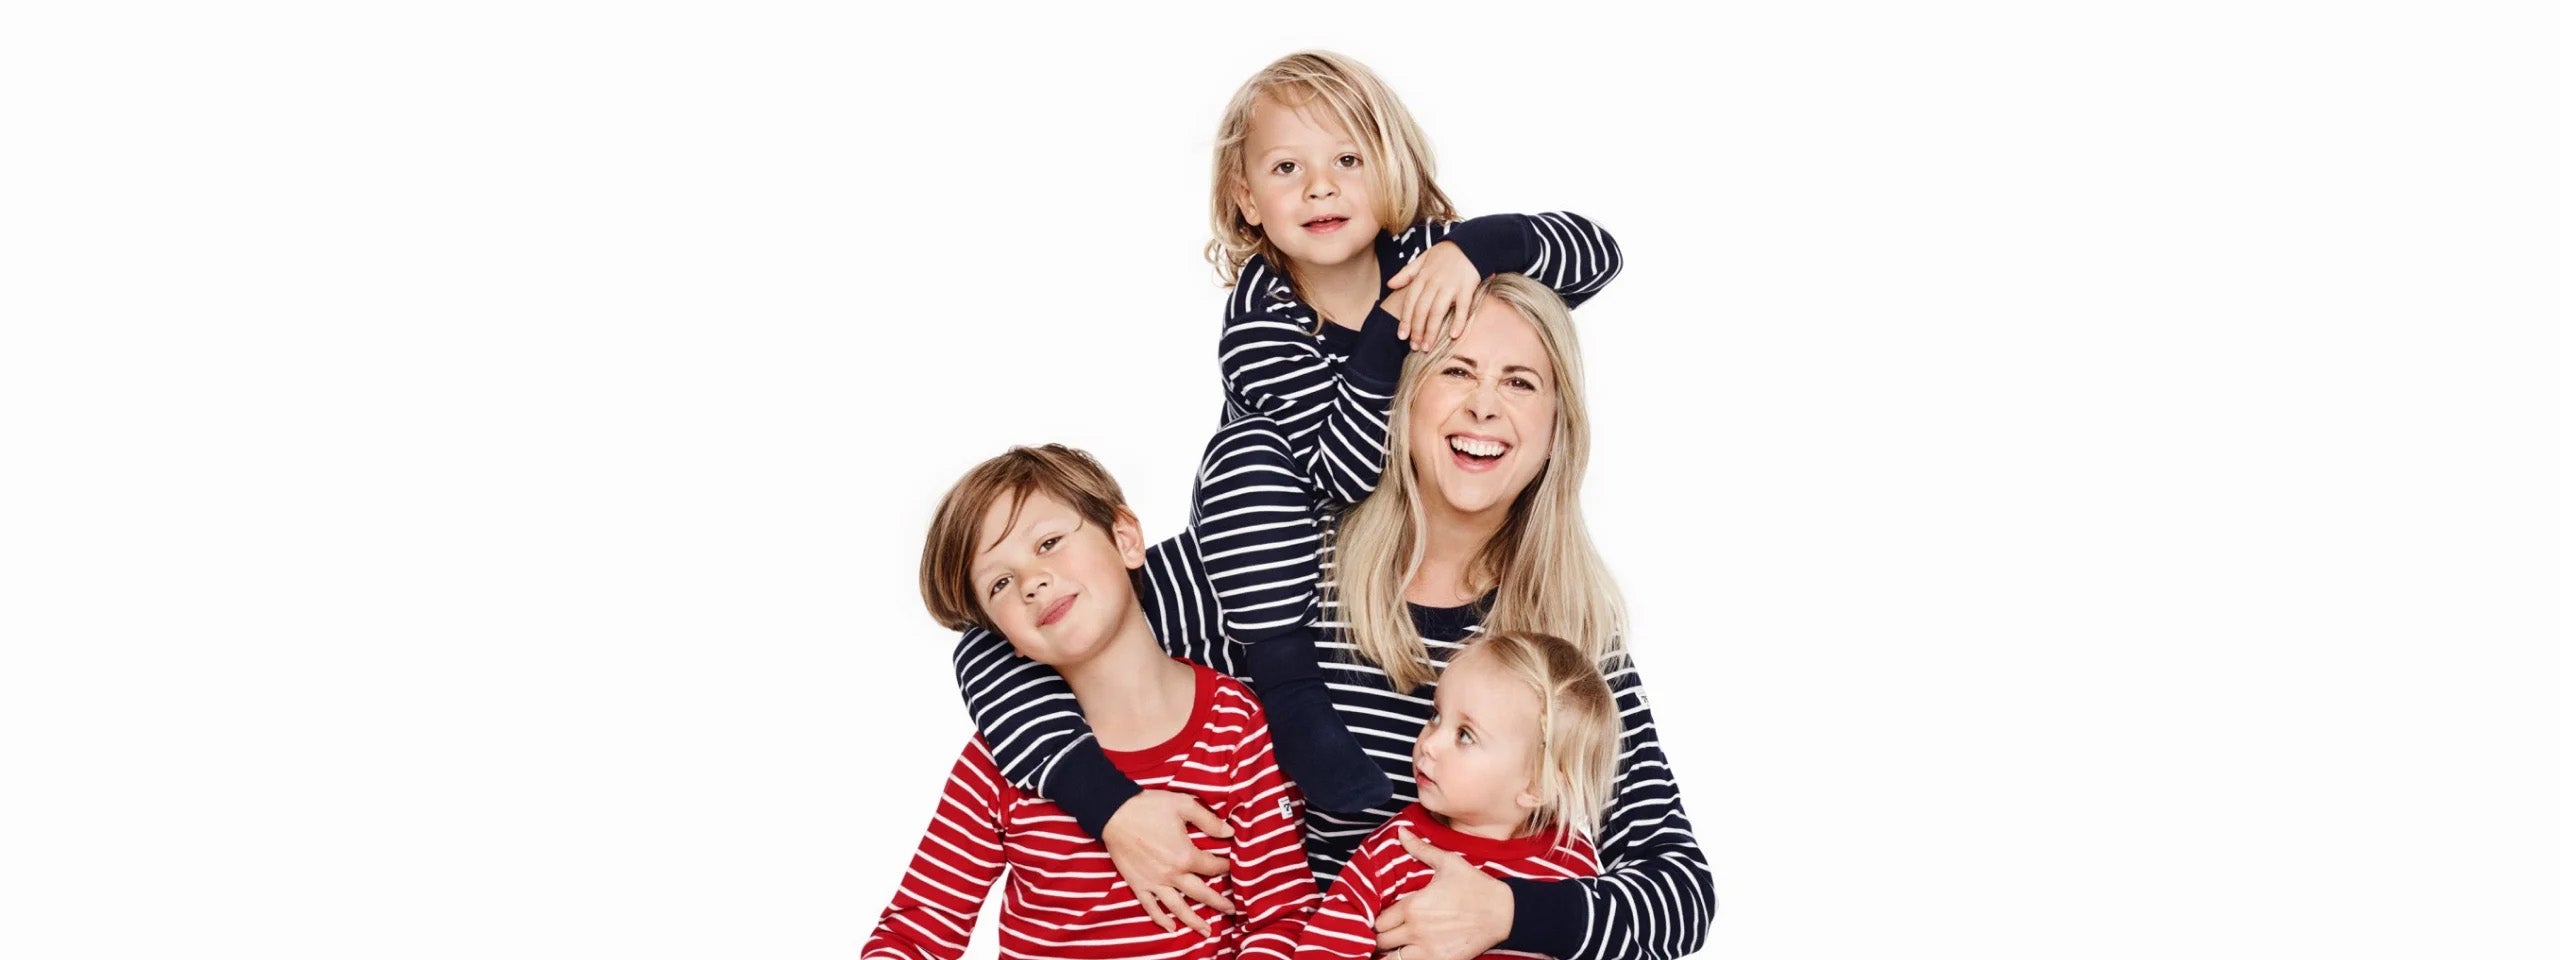 Adult model and three children, all in striped shirts 